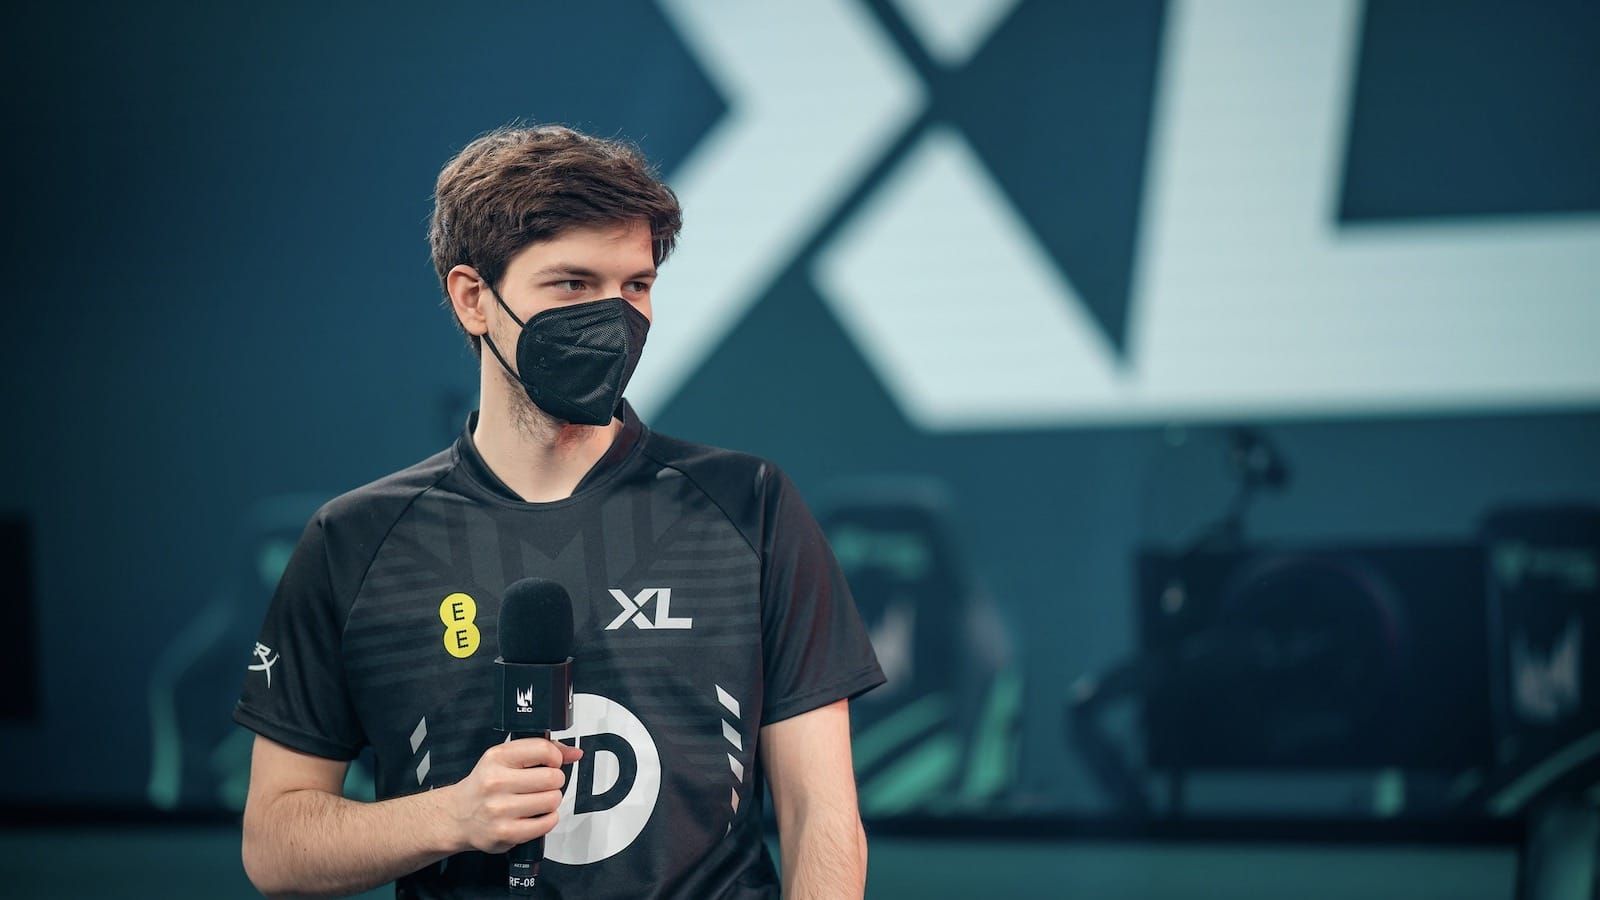 Excel Esports League of Legends player Mikyx holds a microphone onstage as he listens to an interview question